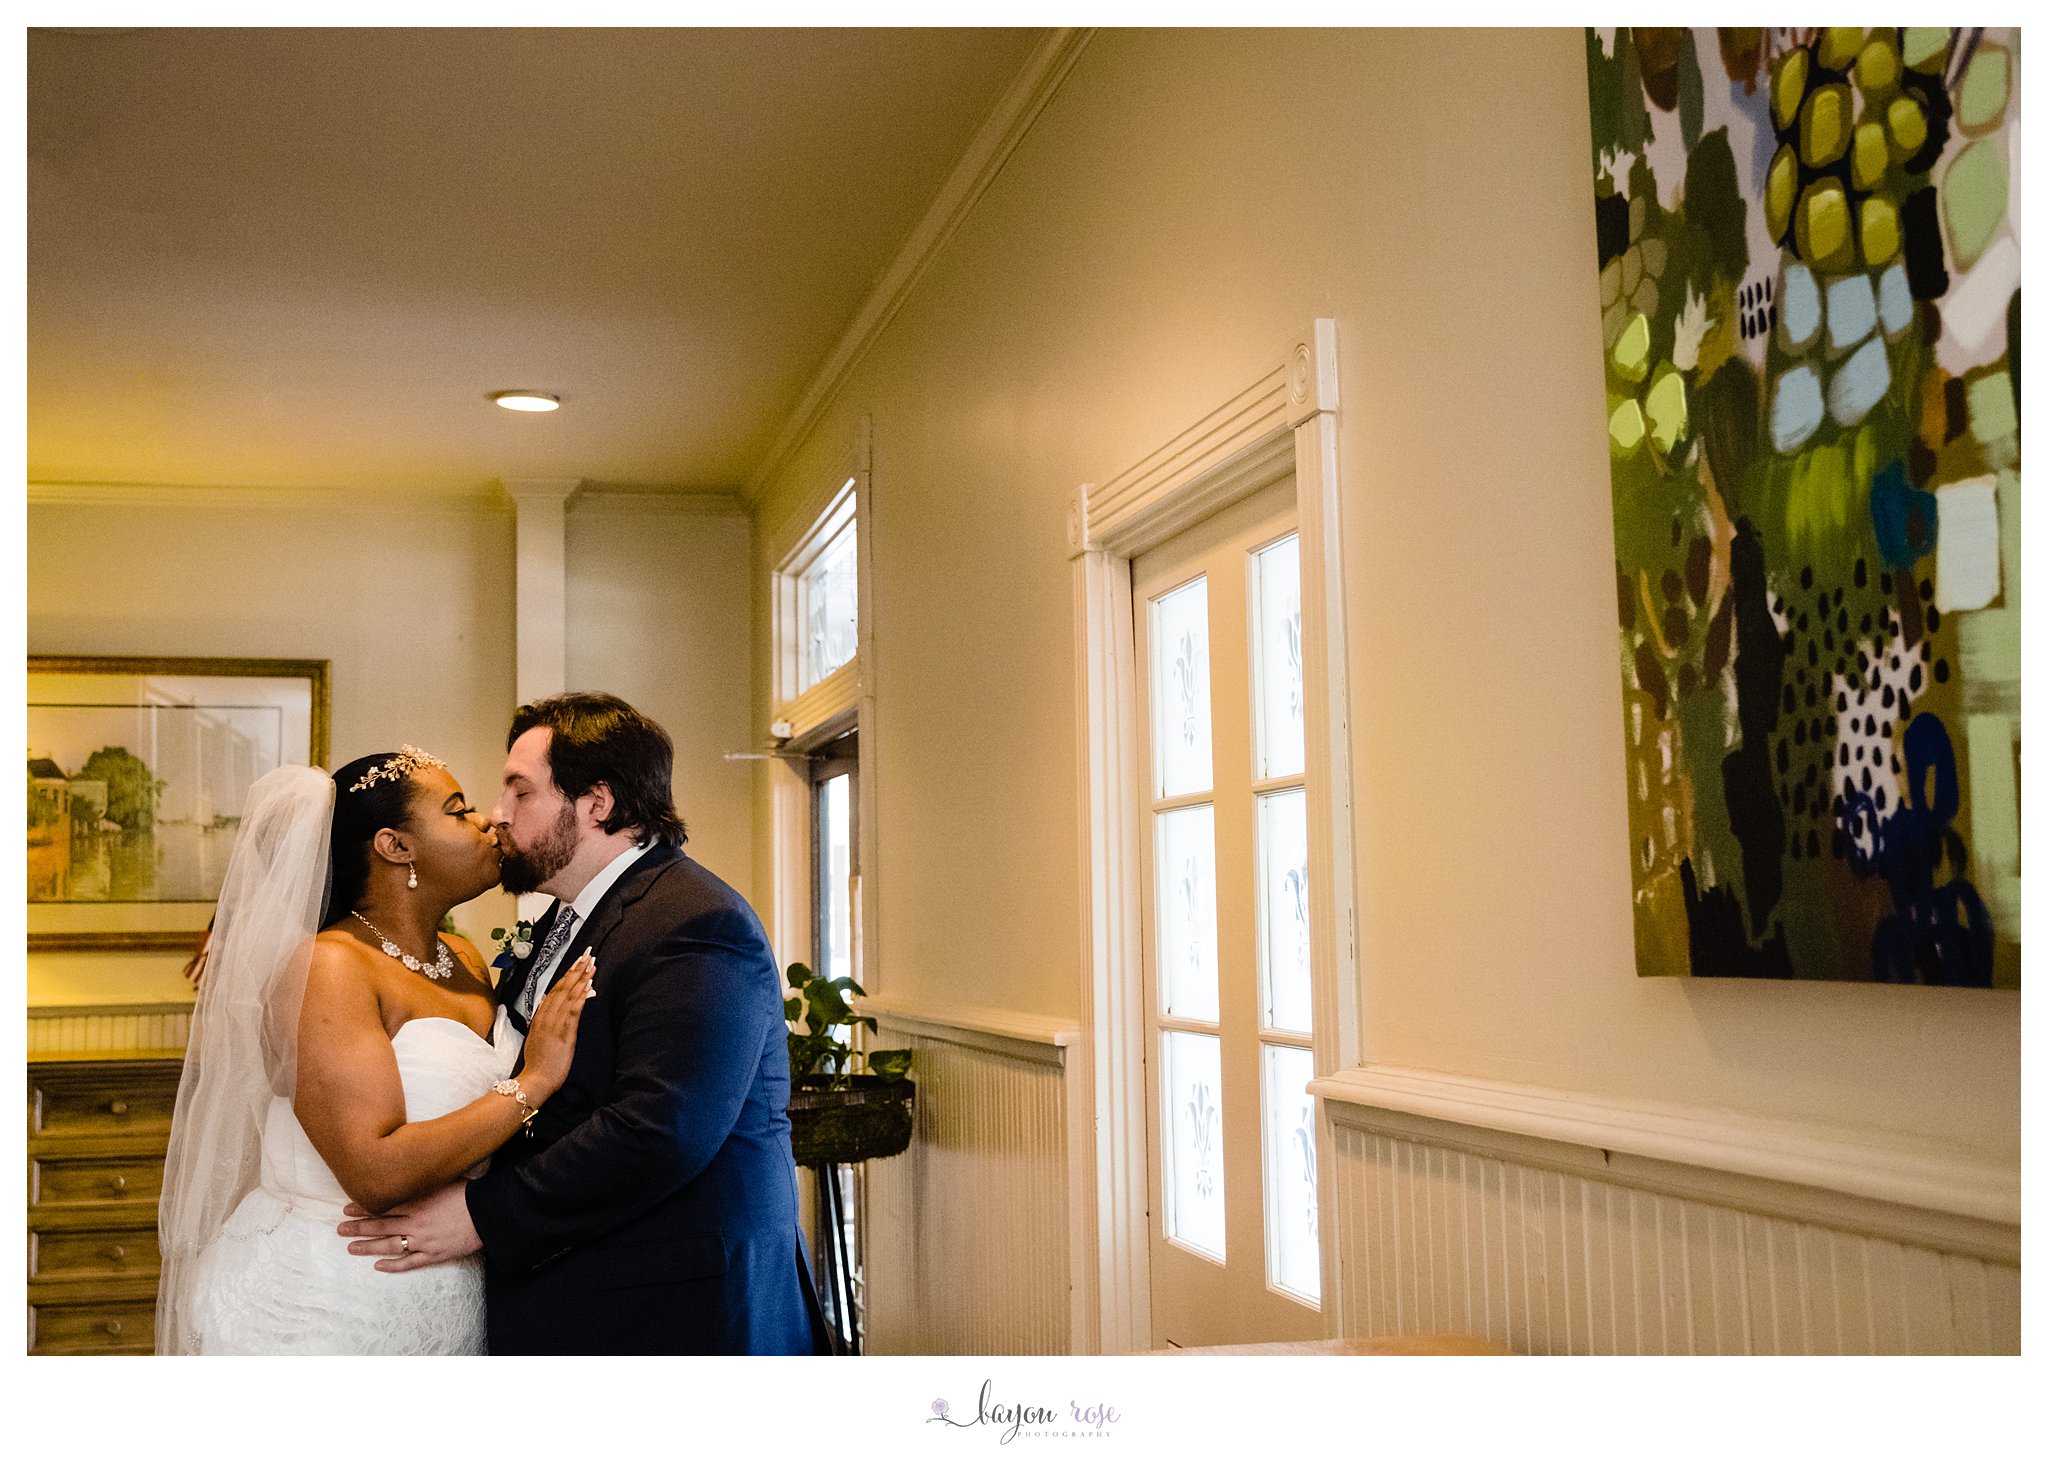 kissing bride and groom portrait after elopement in Baton Rouge